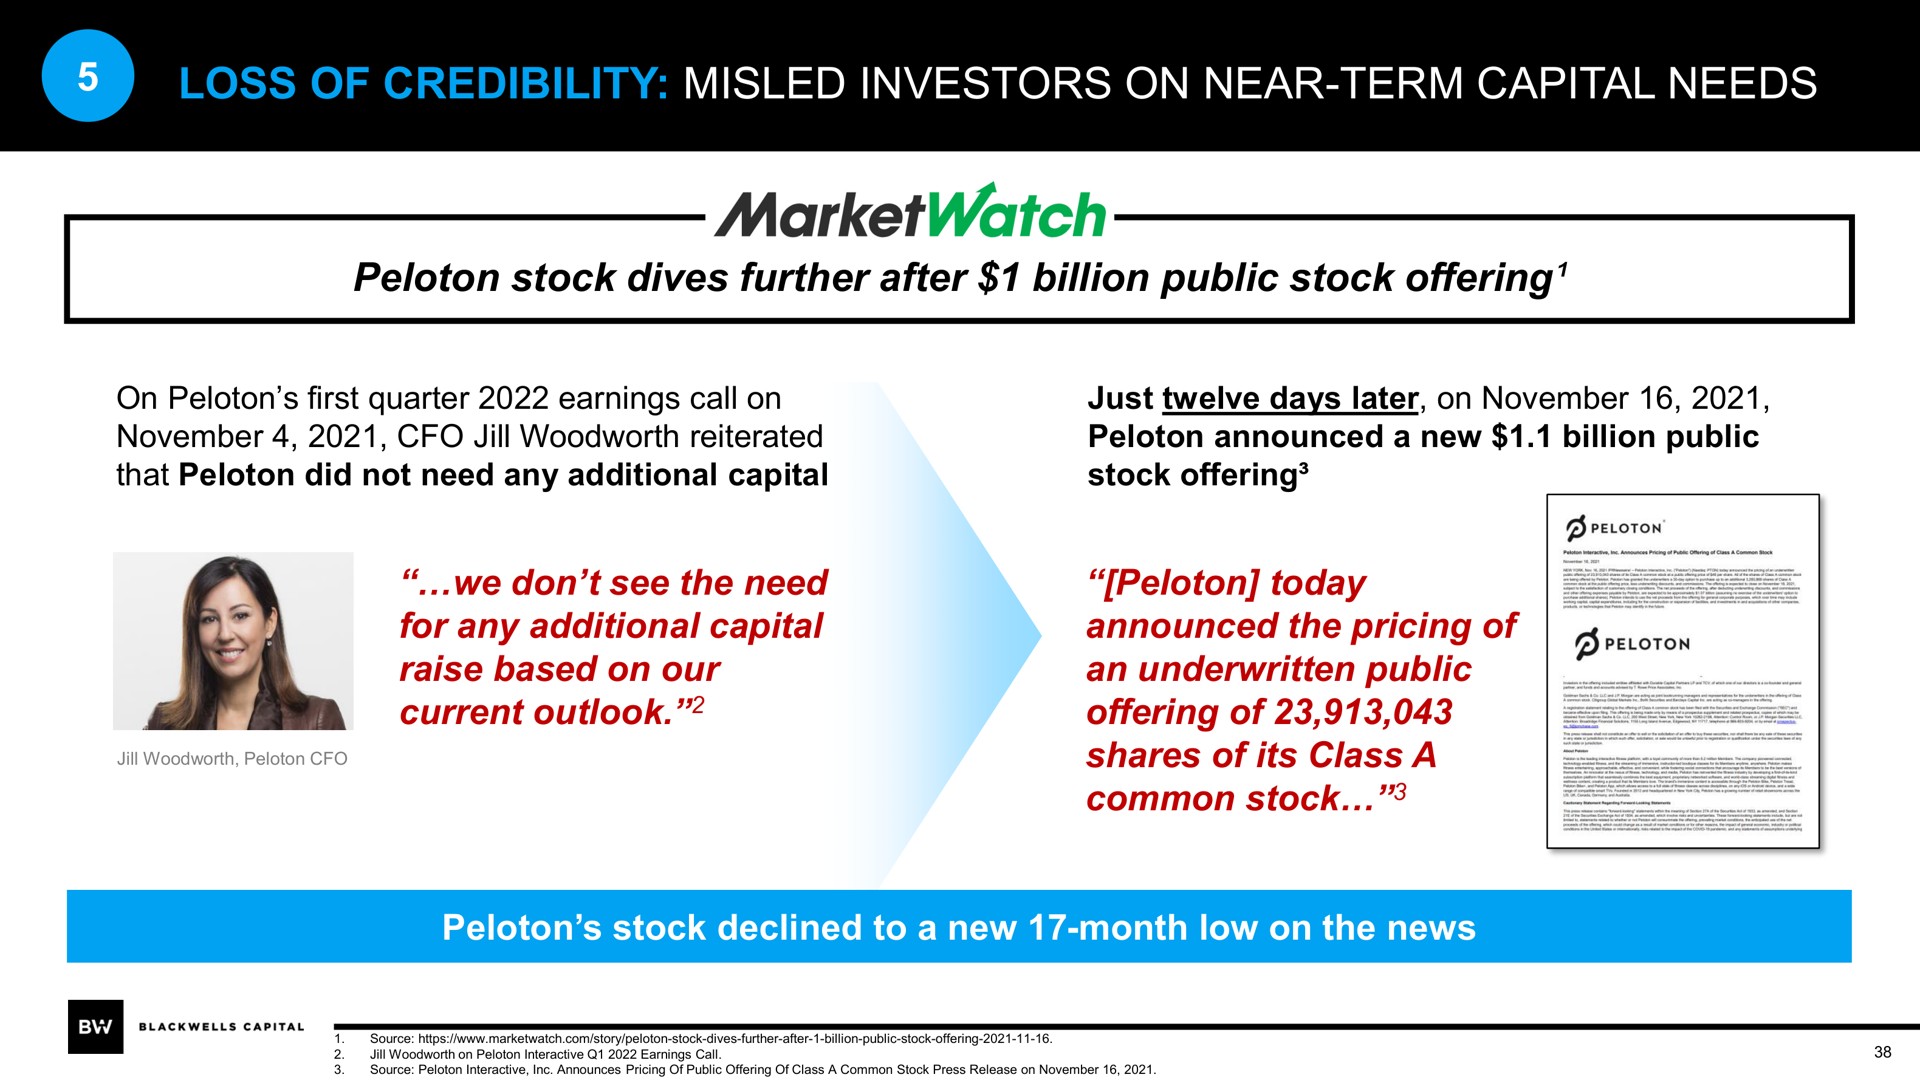 loss of credibility misled investors on near term capital needs peloton stock dives further after billion public stock offering | Blackwells Capital